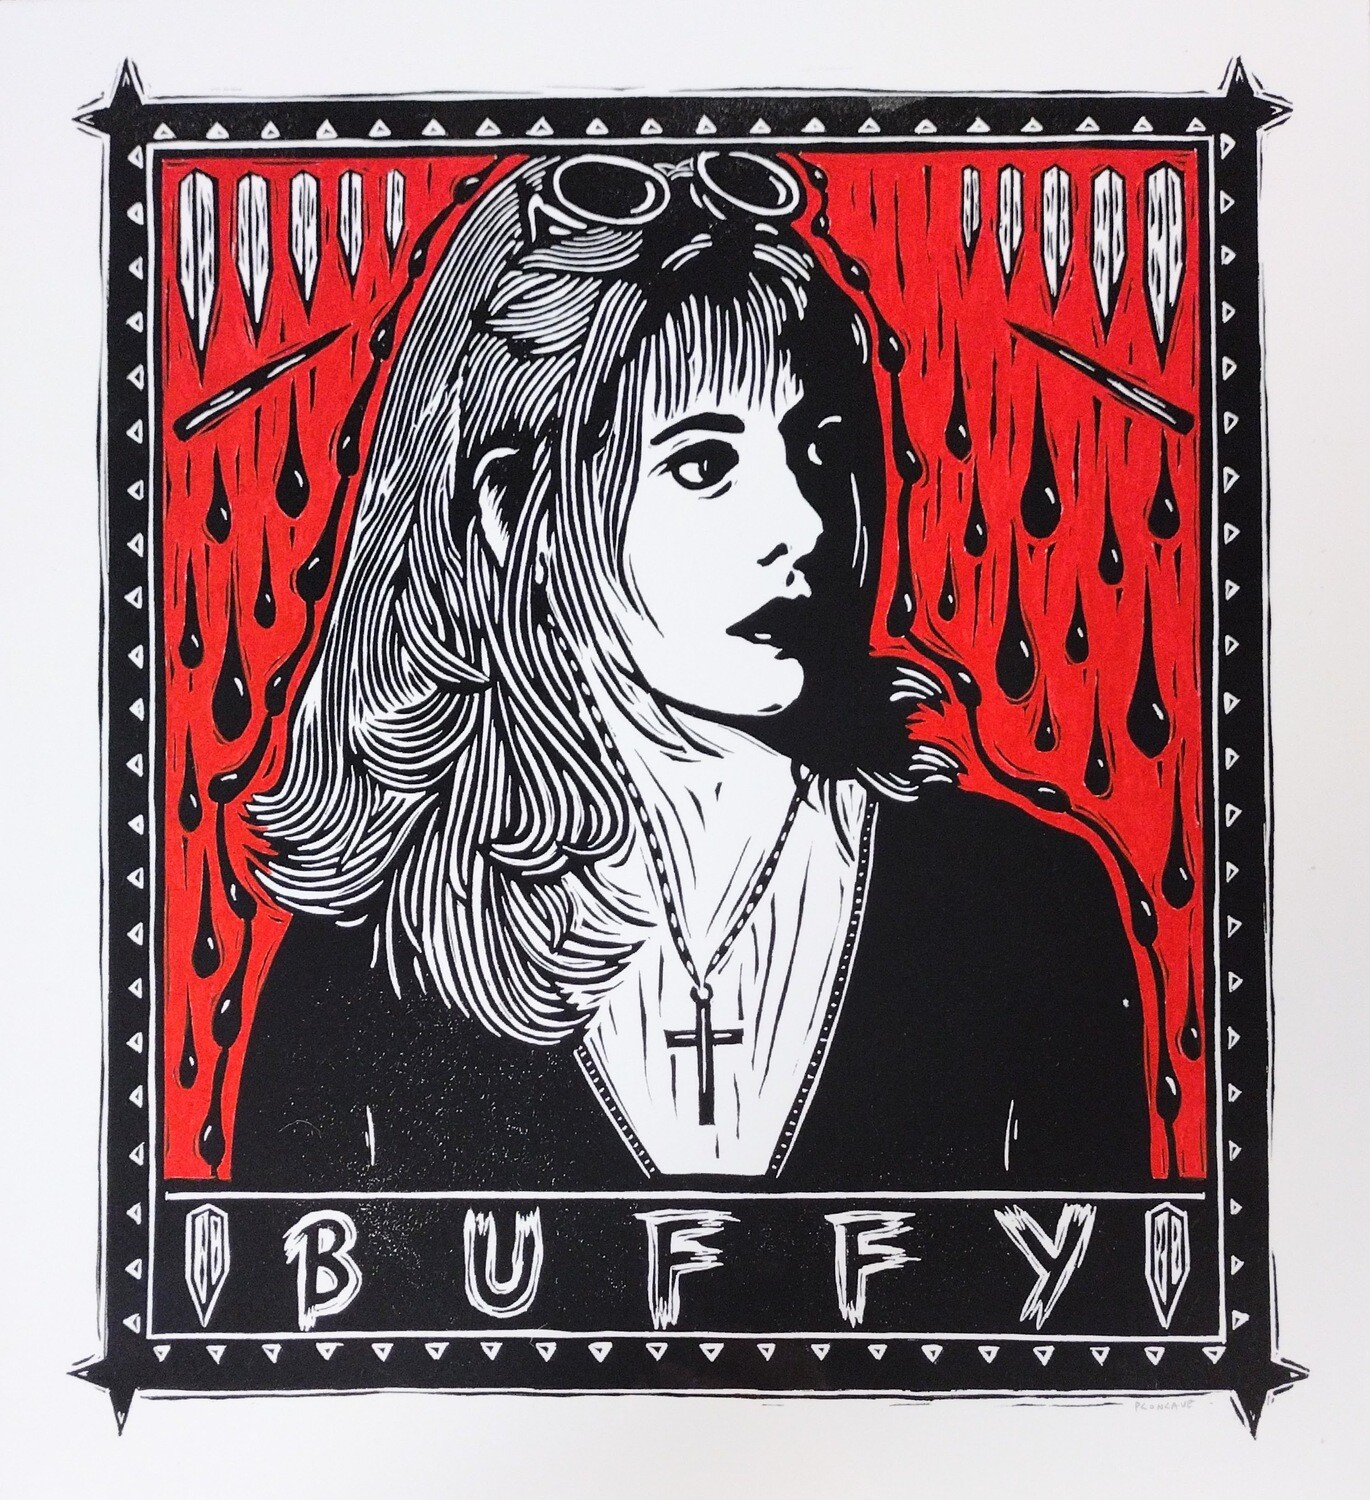 Buffy - Lino Print by PConcave